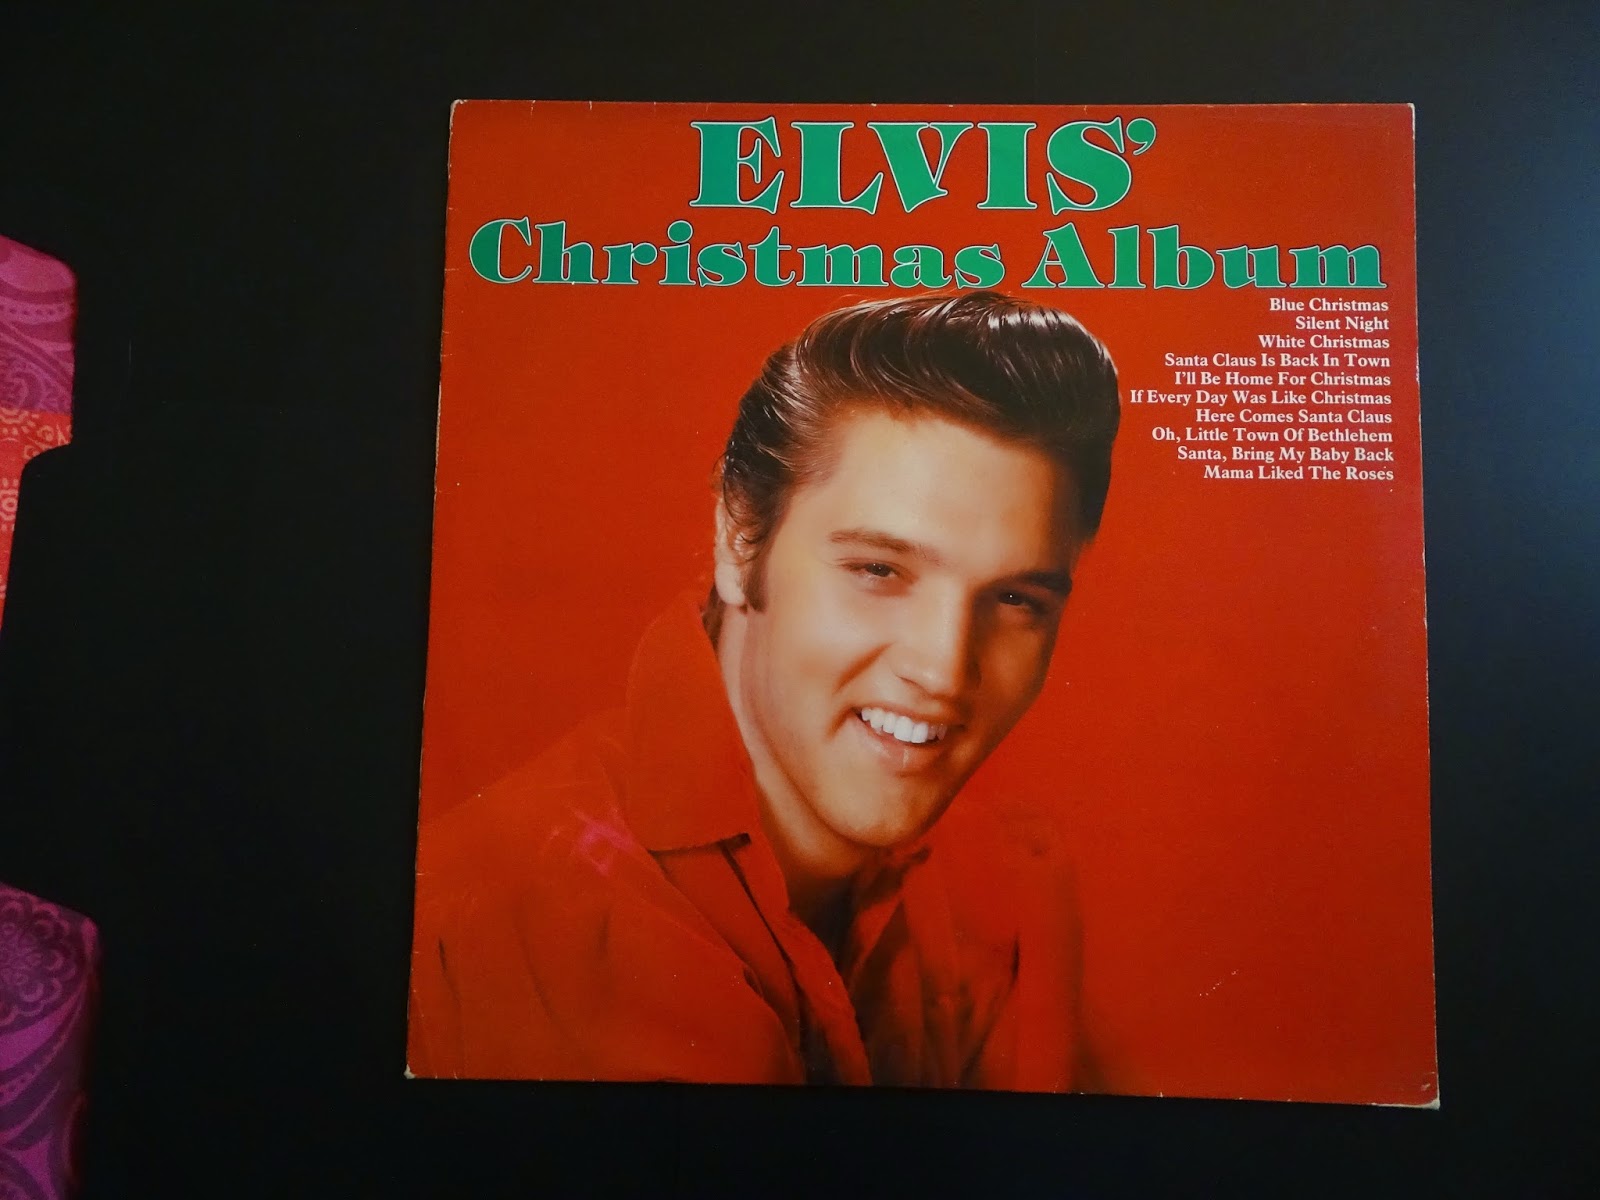 Elvis Presley Uk Record Discography Cdsv 1155 Elvis Christmas Album Made For Export A Very Few Could Be Found In Asda But Most Left The Uk These Are Quite Rare A